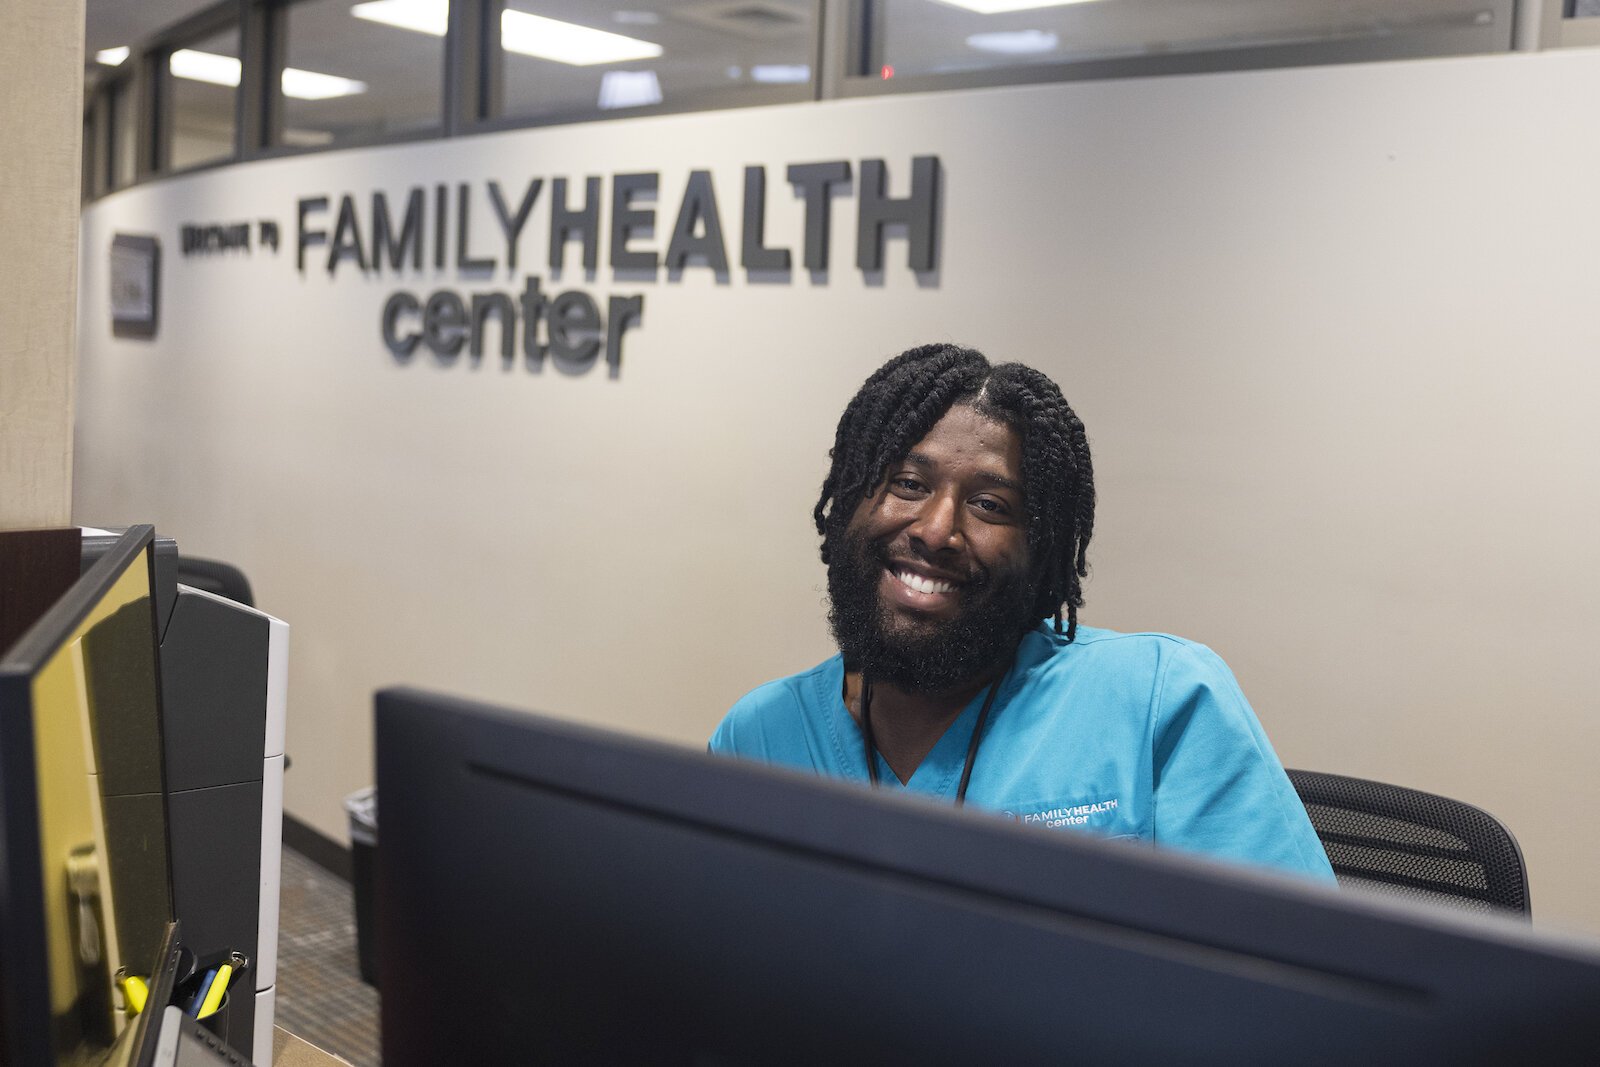 Customer Experience Tech, Kendric Jackson, checks in a patient at the Family Health Center in Kalamazoo, Michigan on Monday, Sept. 25, 2023. (Joel Bissell | MLive.com)